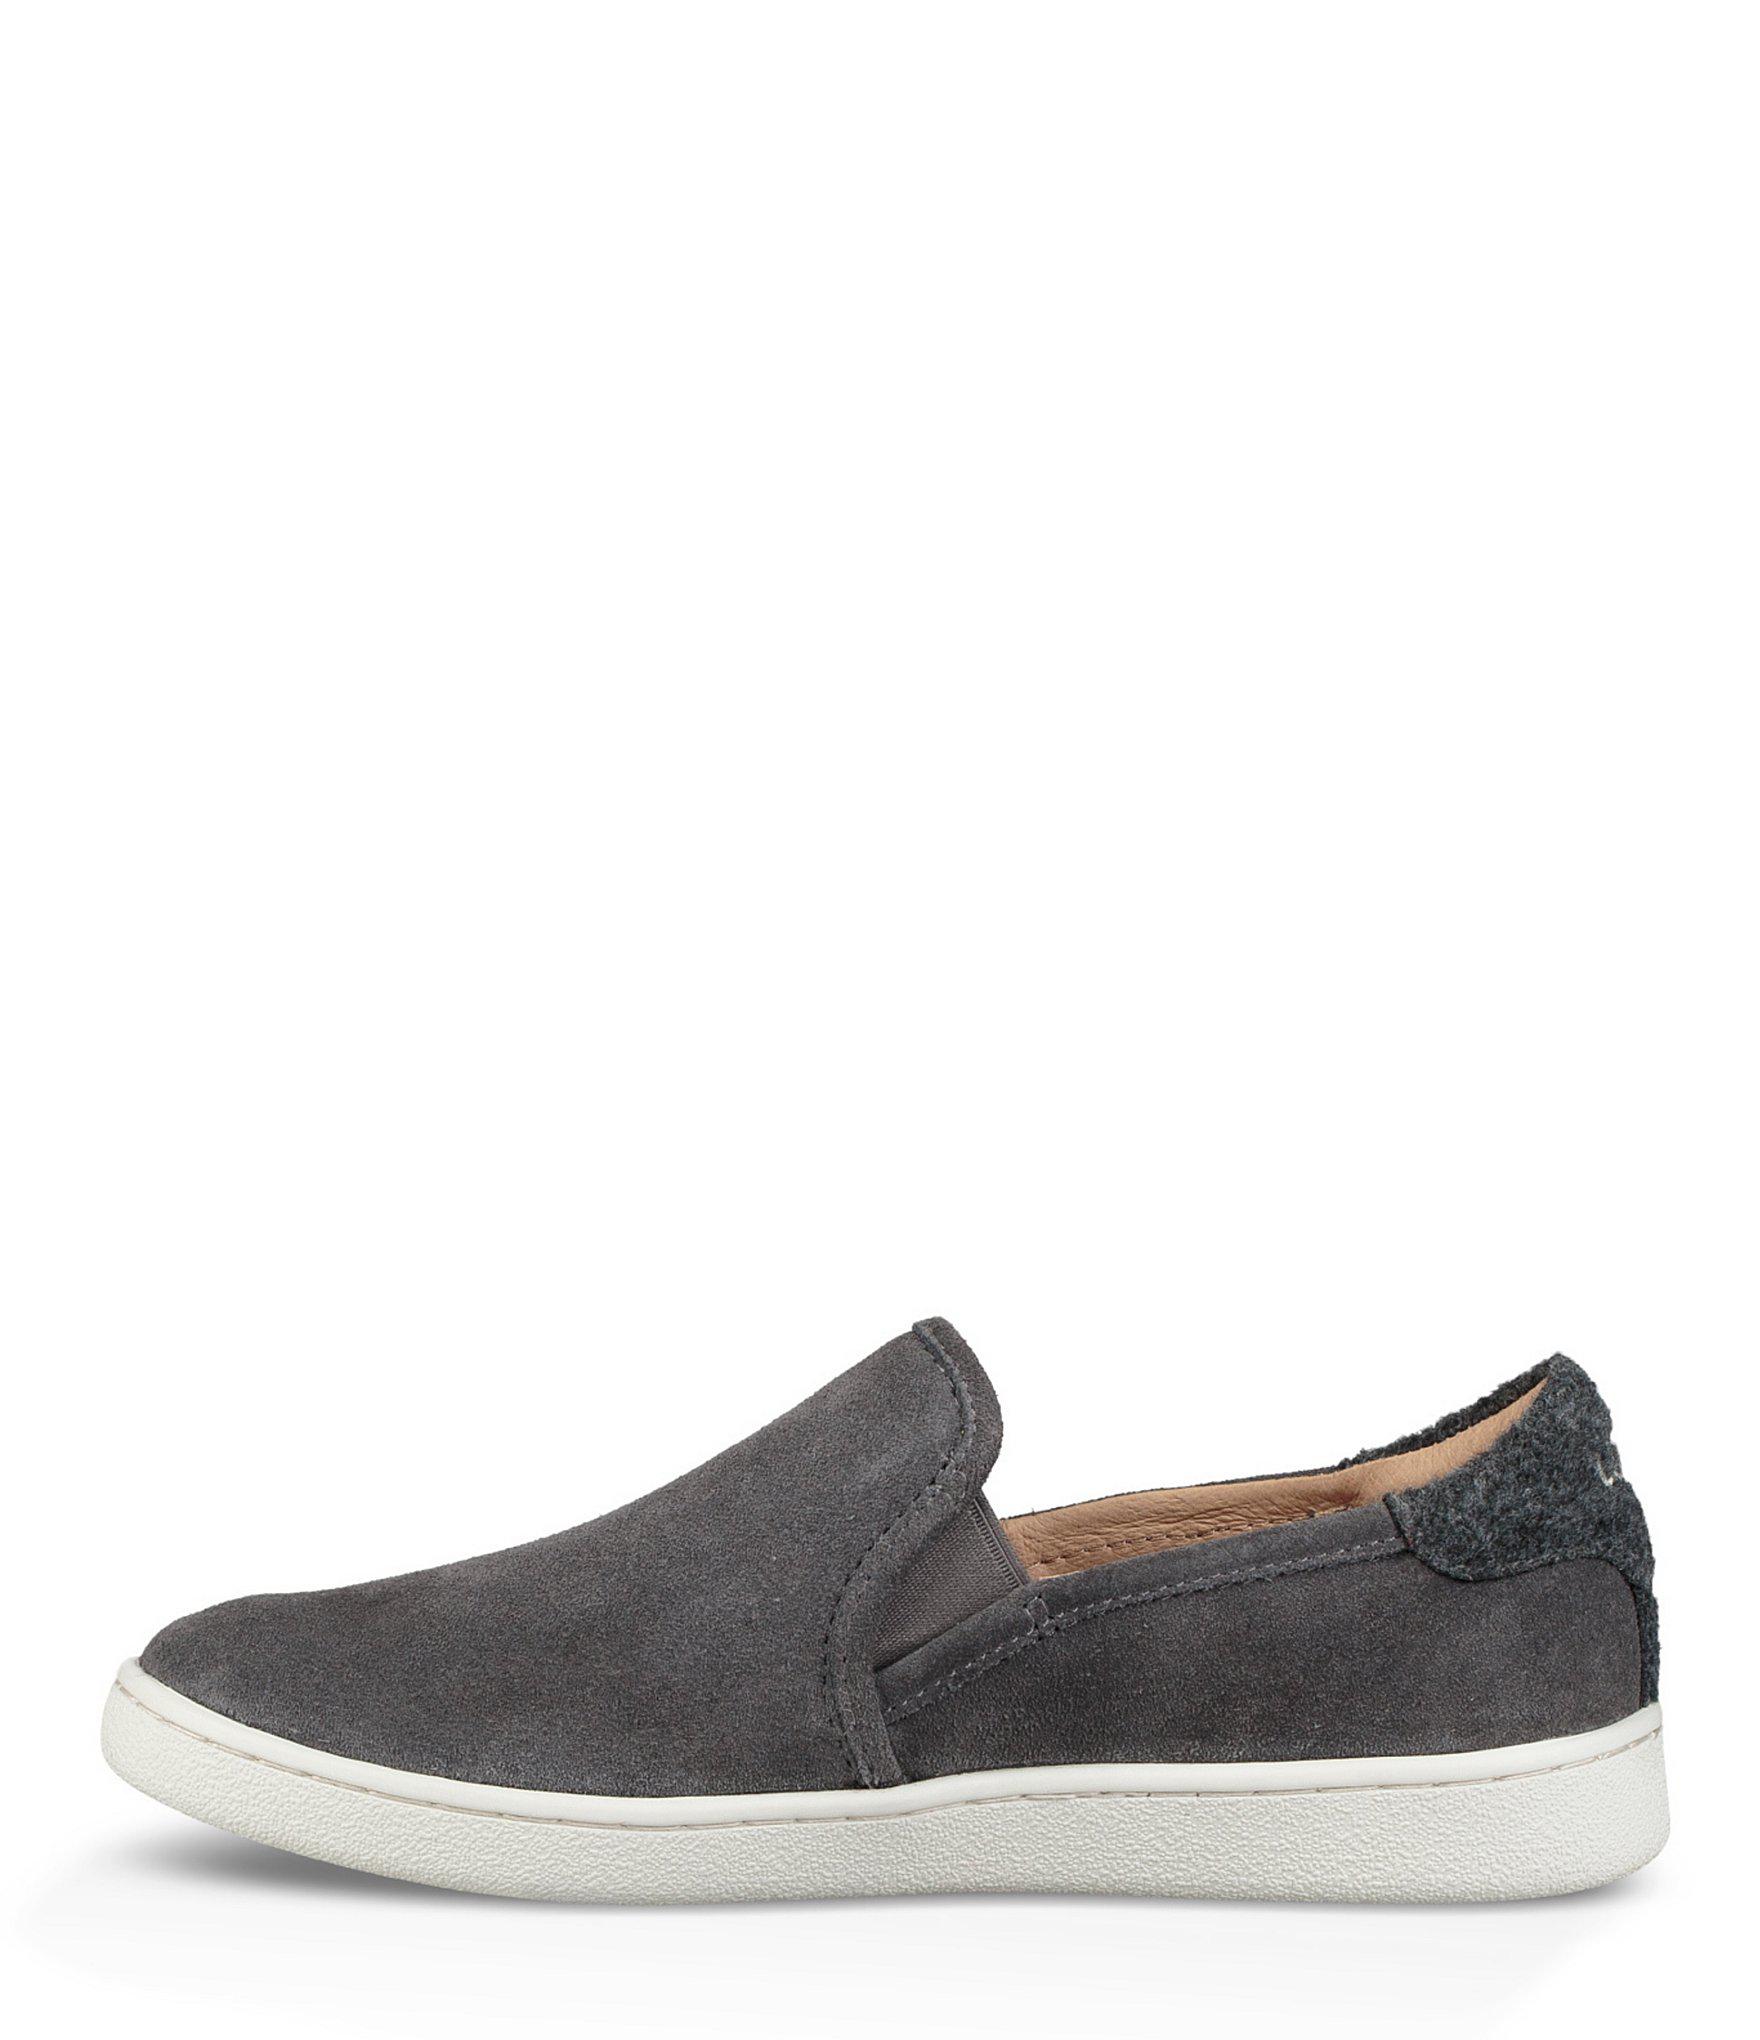 UGG Cas Suede Slip On Sneakers in Charcoal (Gray) - Lyst